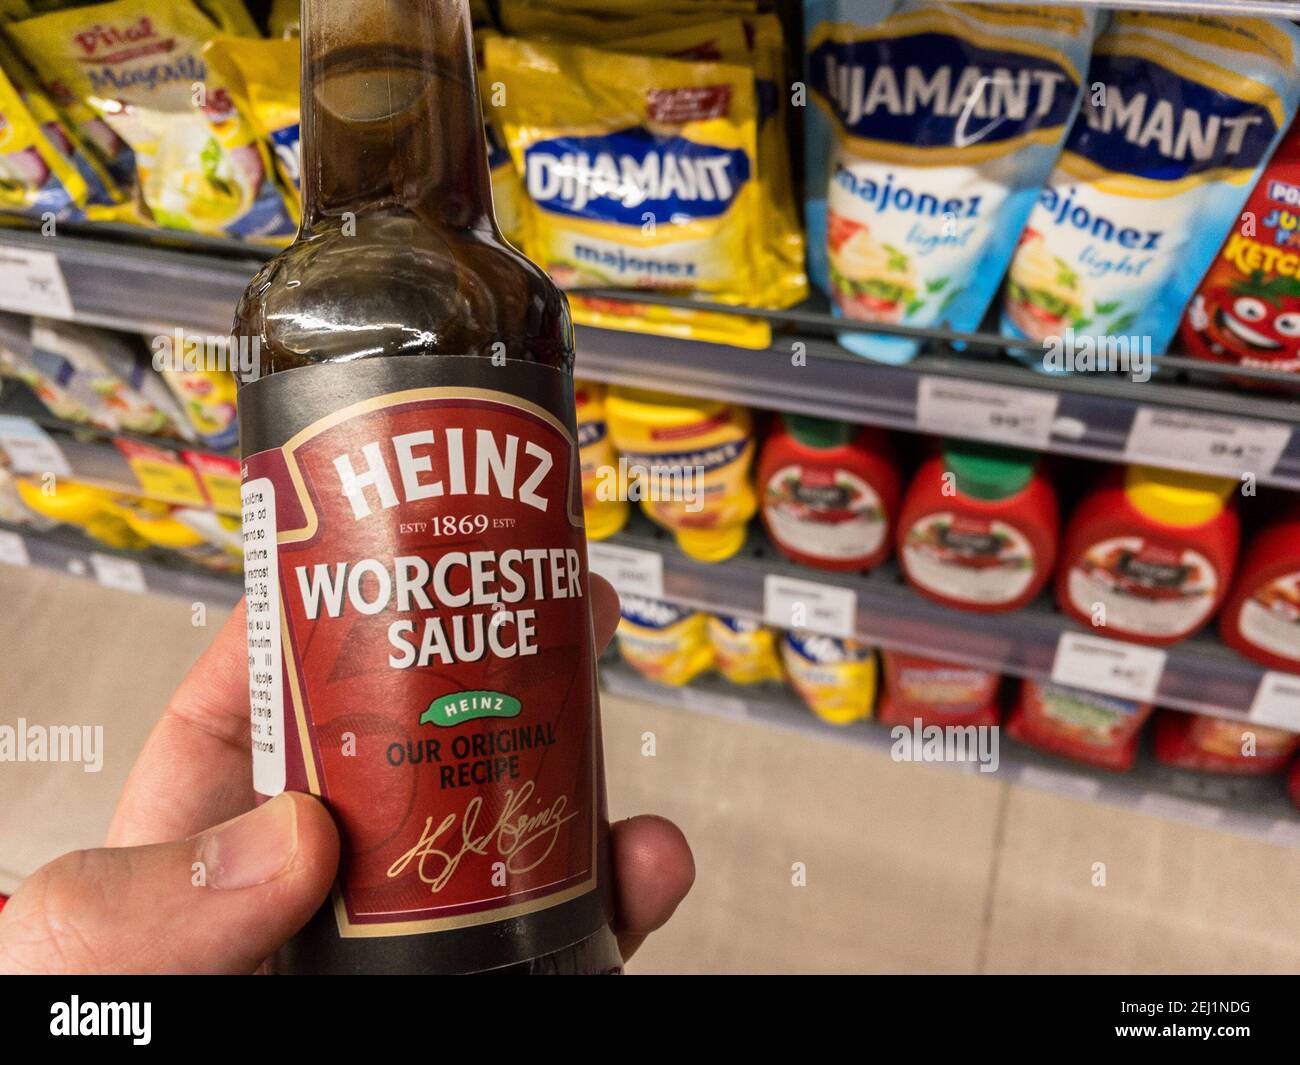 BELGRADE, SERBIA - FEBRUARY 17, 2021: Heinz Worcester sauce logo on one of their bottles for sale in Belgrade. heinz is an american food processing se Stock Photo